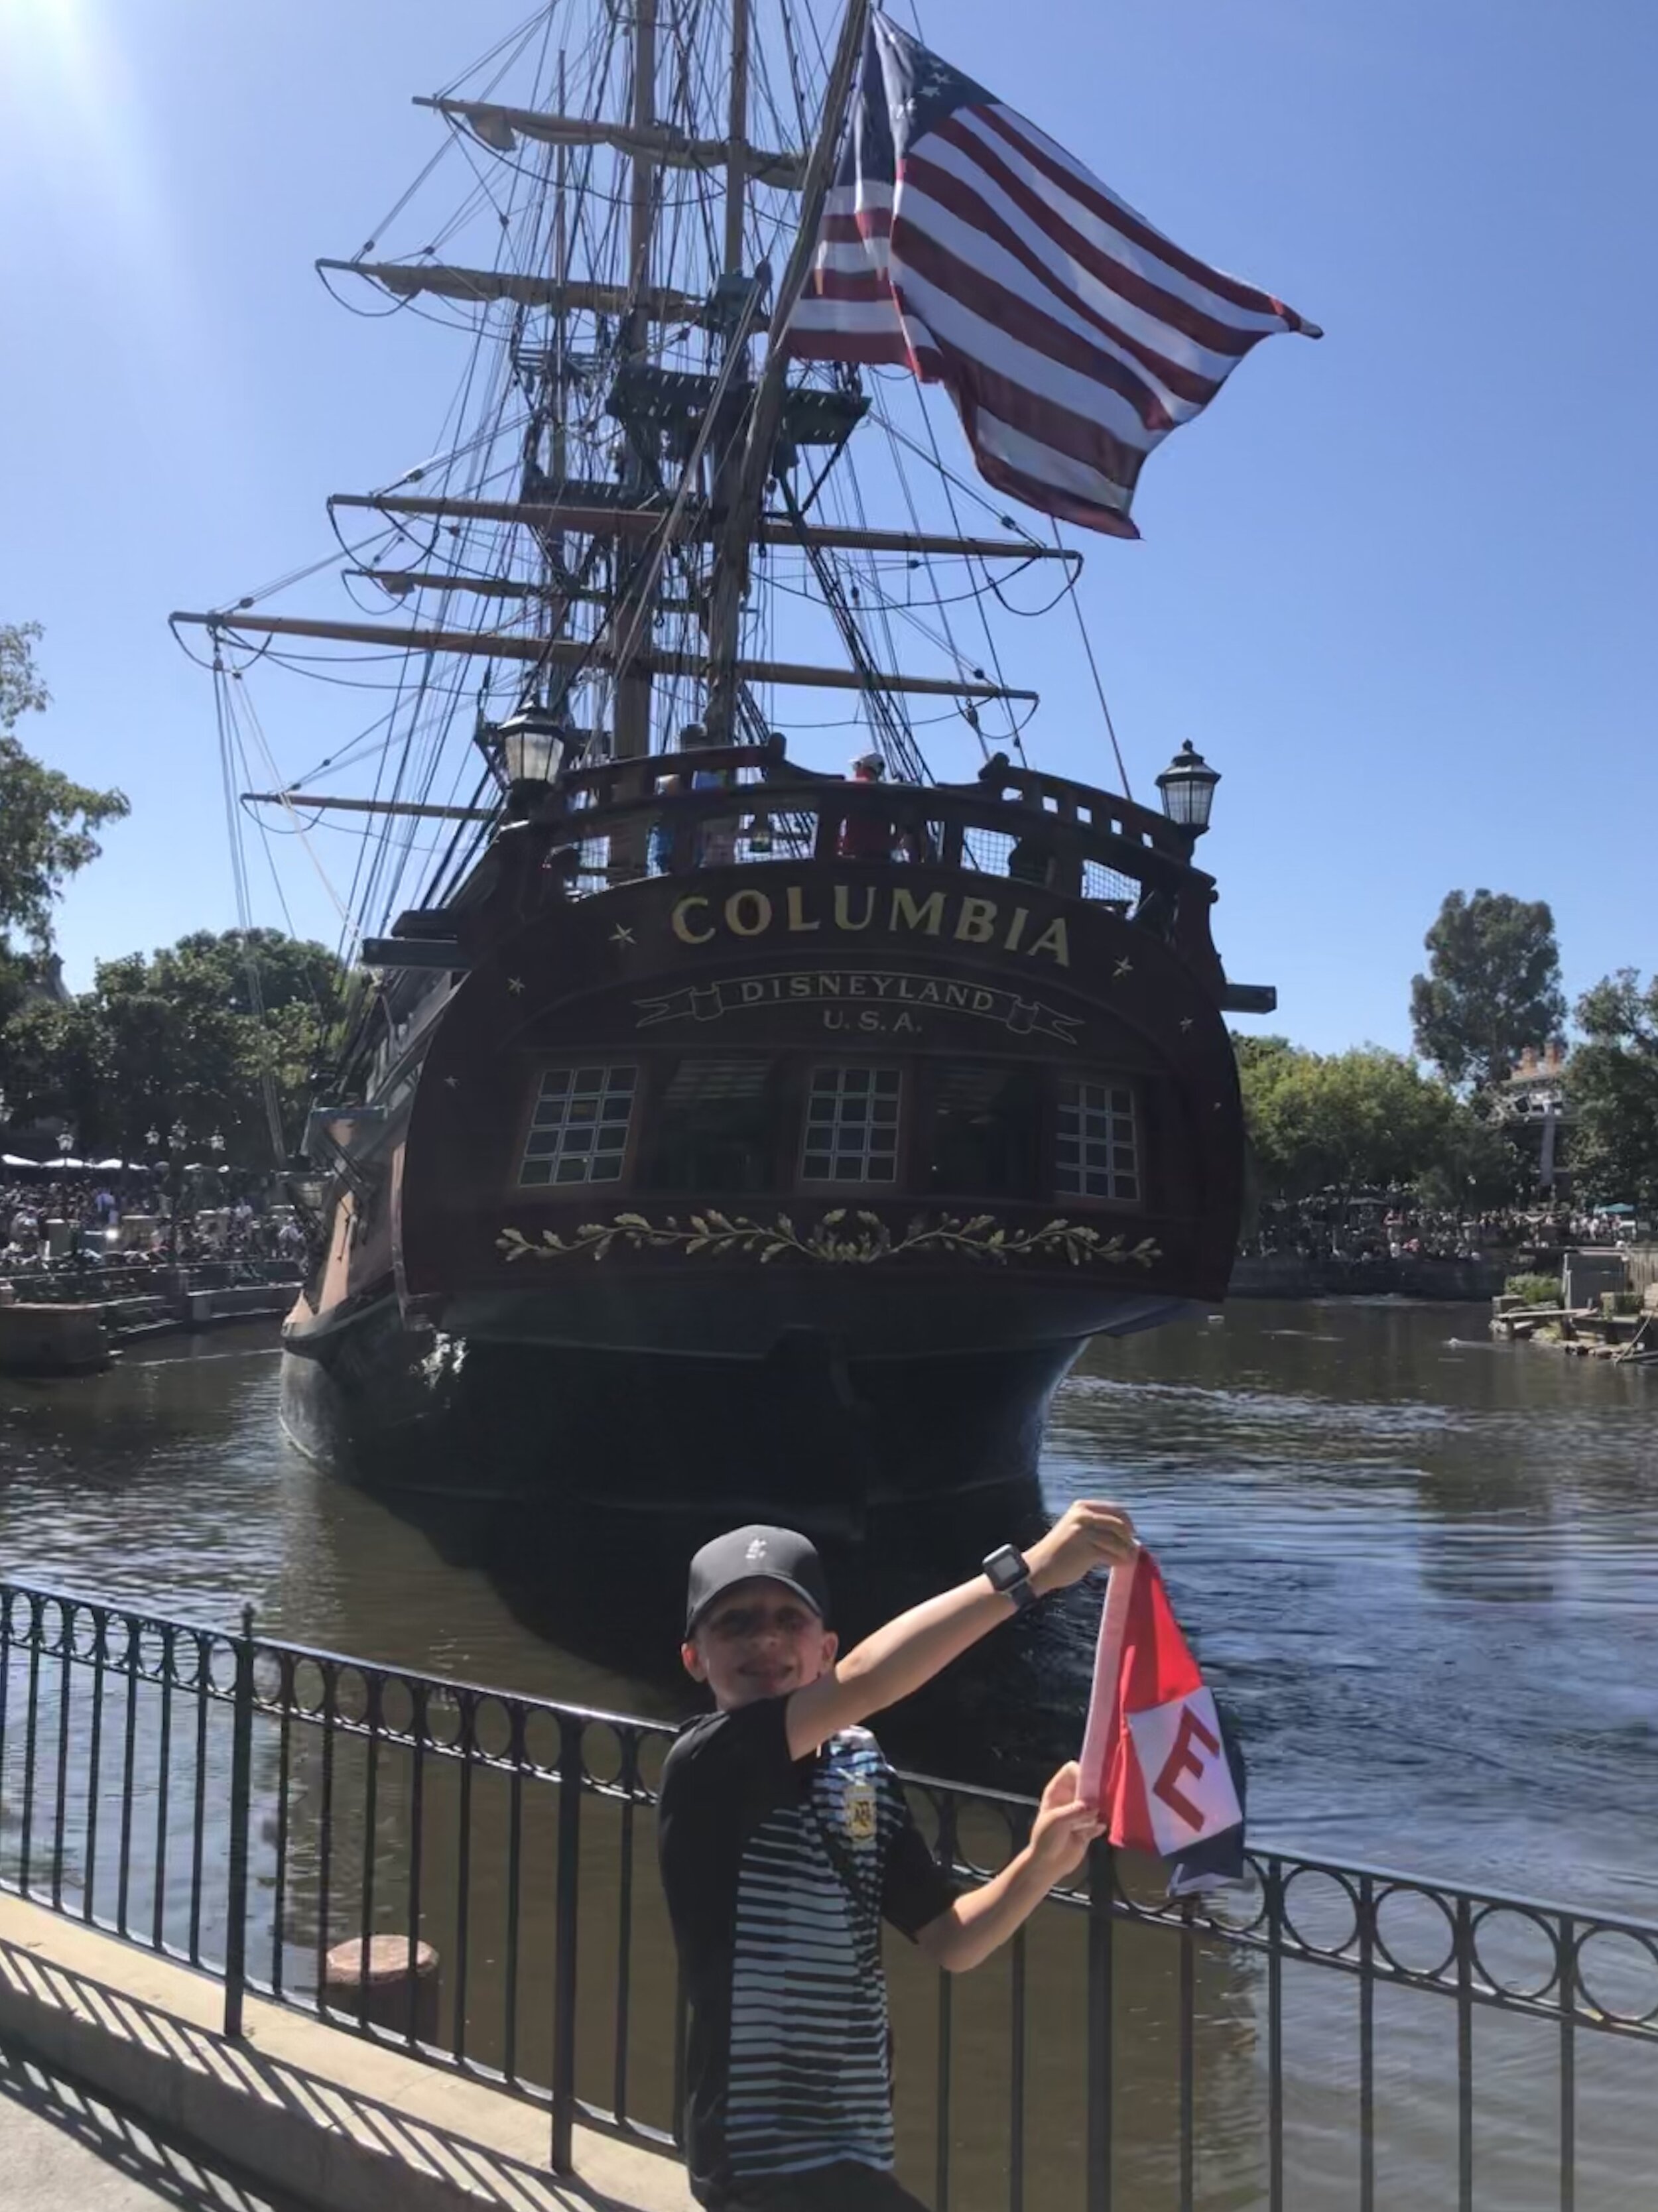  Zachary hoists the EYC colors in front of the Columbia at Disneyland 